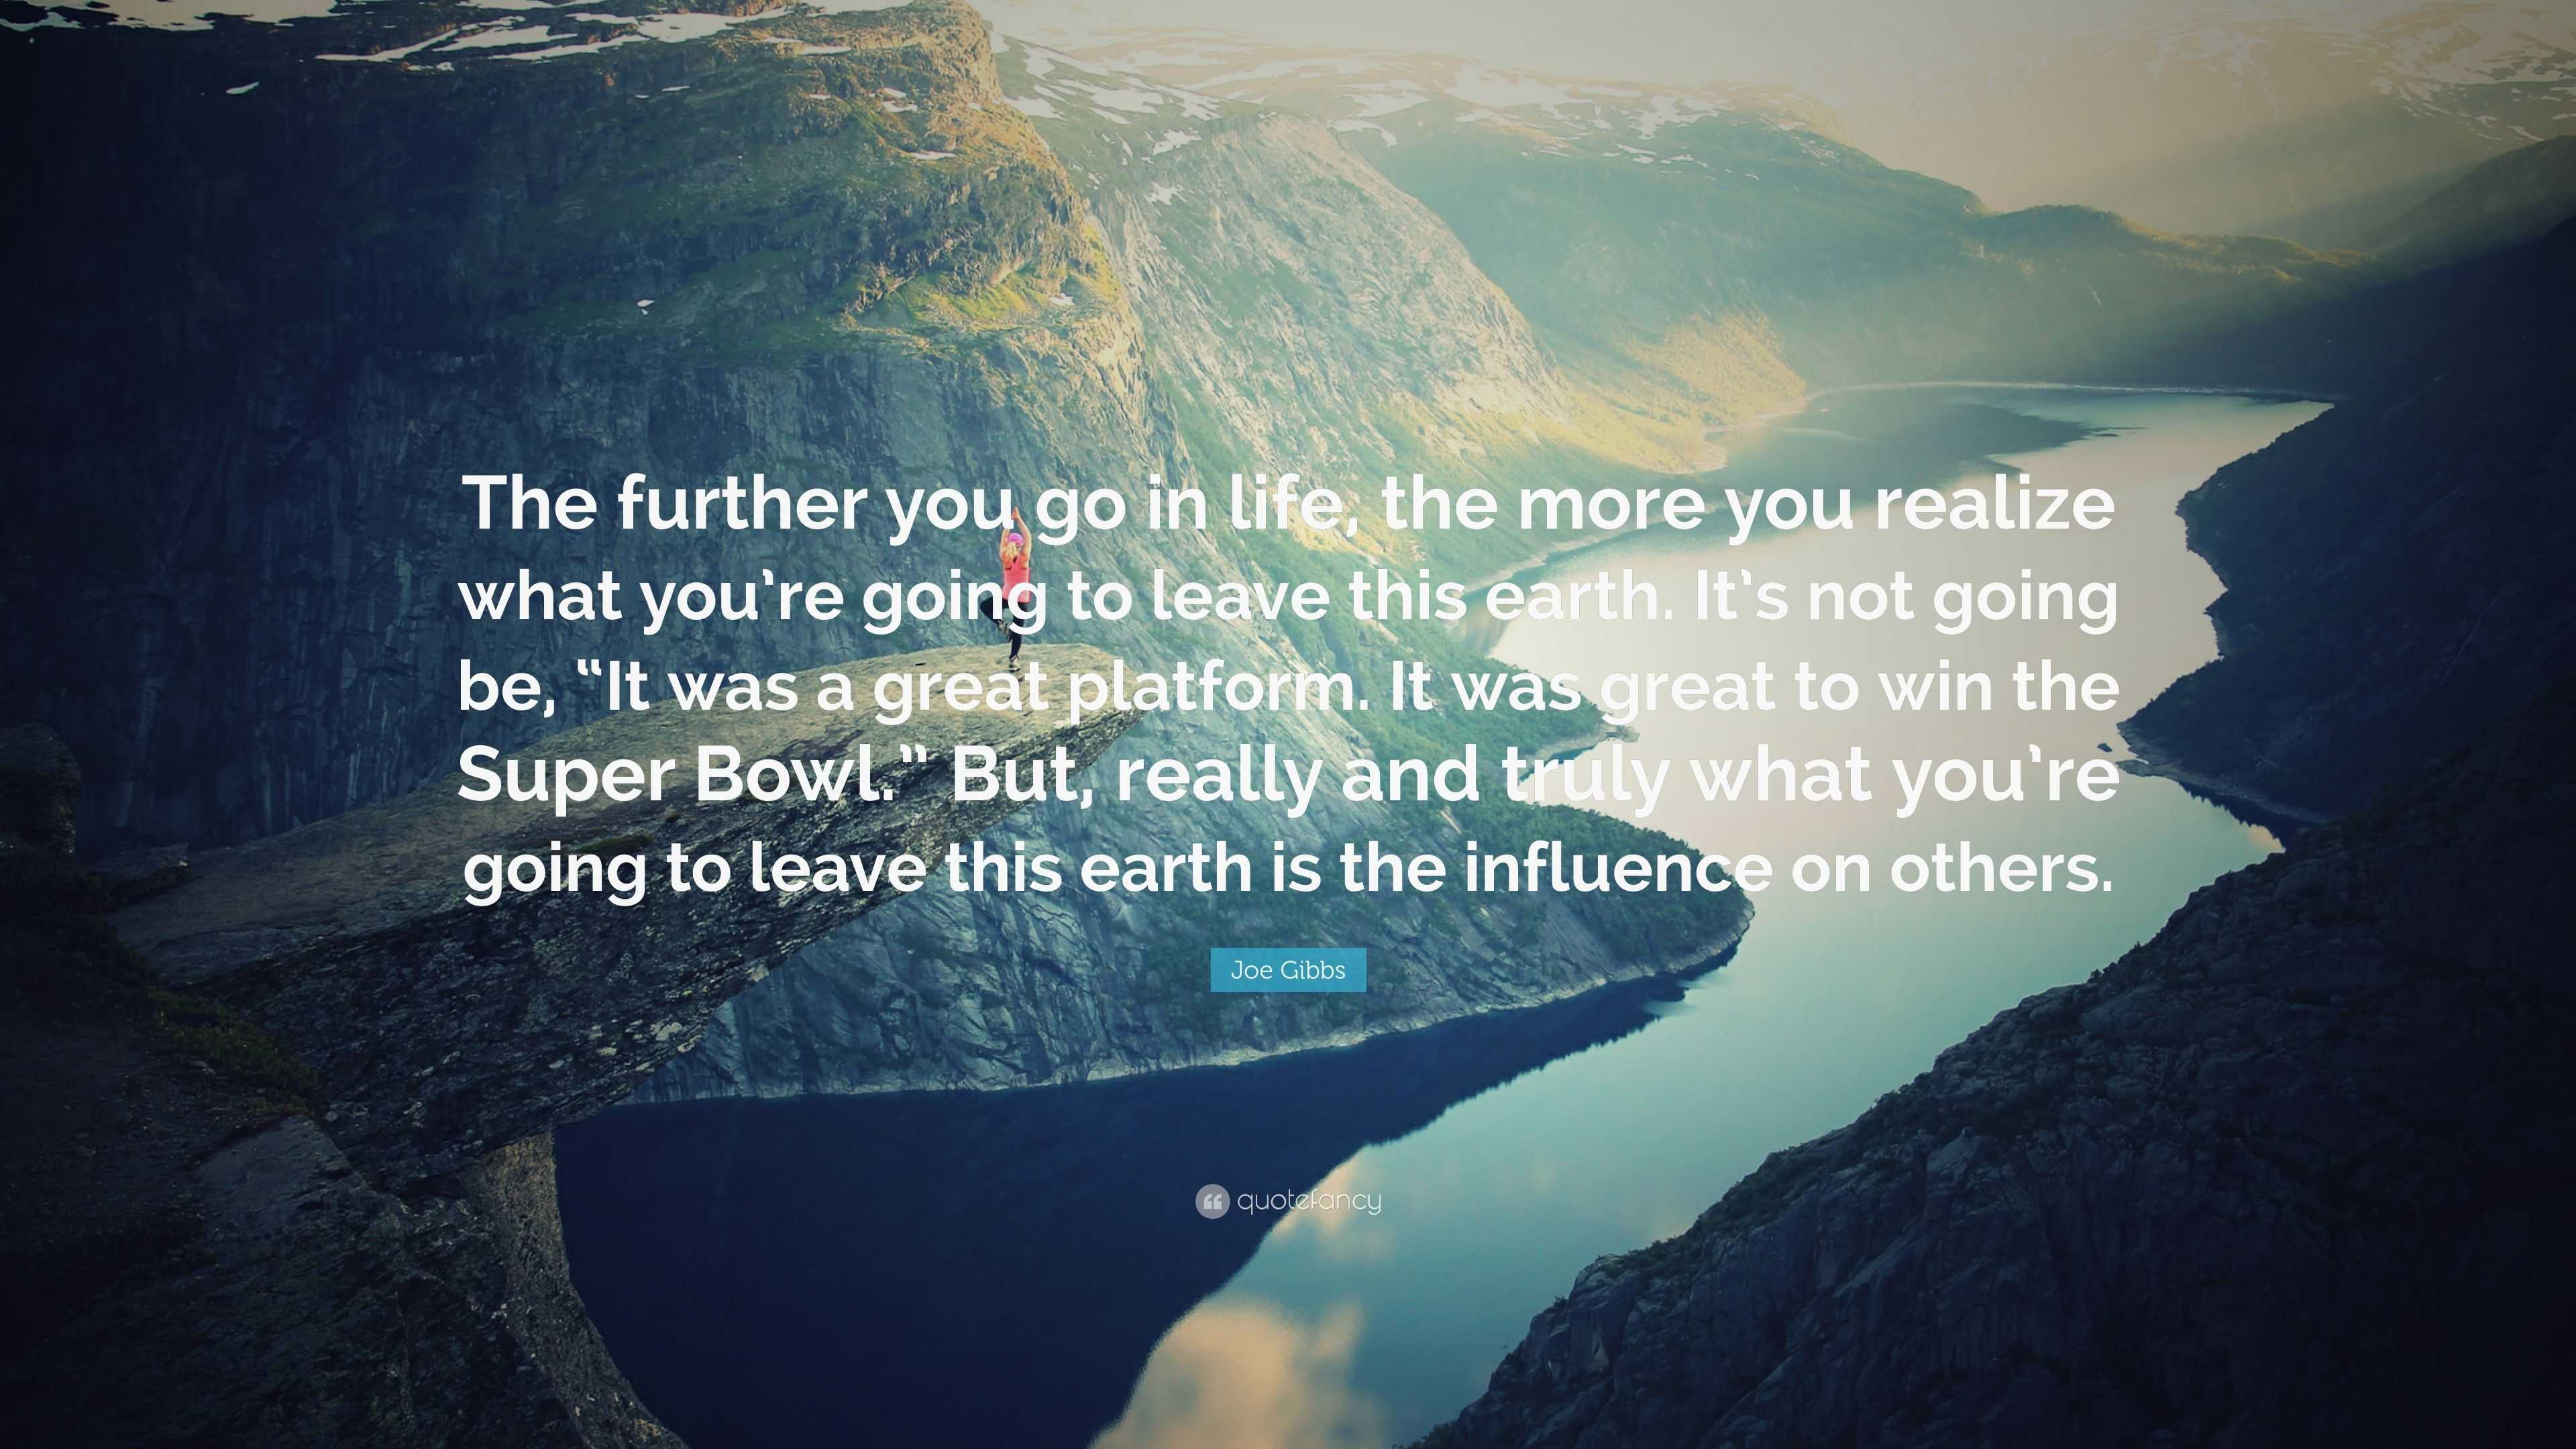 Joe Gibbs Quote: “The further you go in life, the more you realize what ...